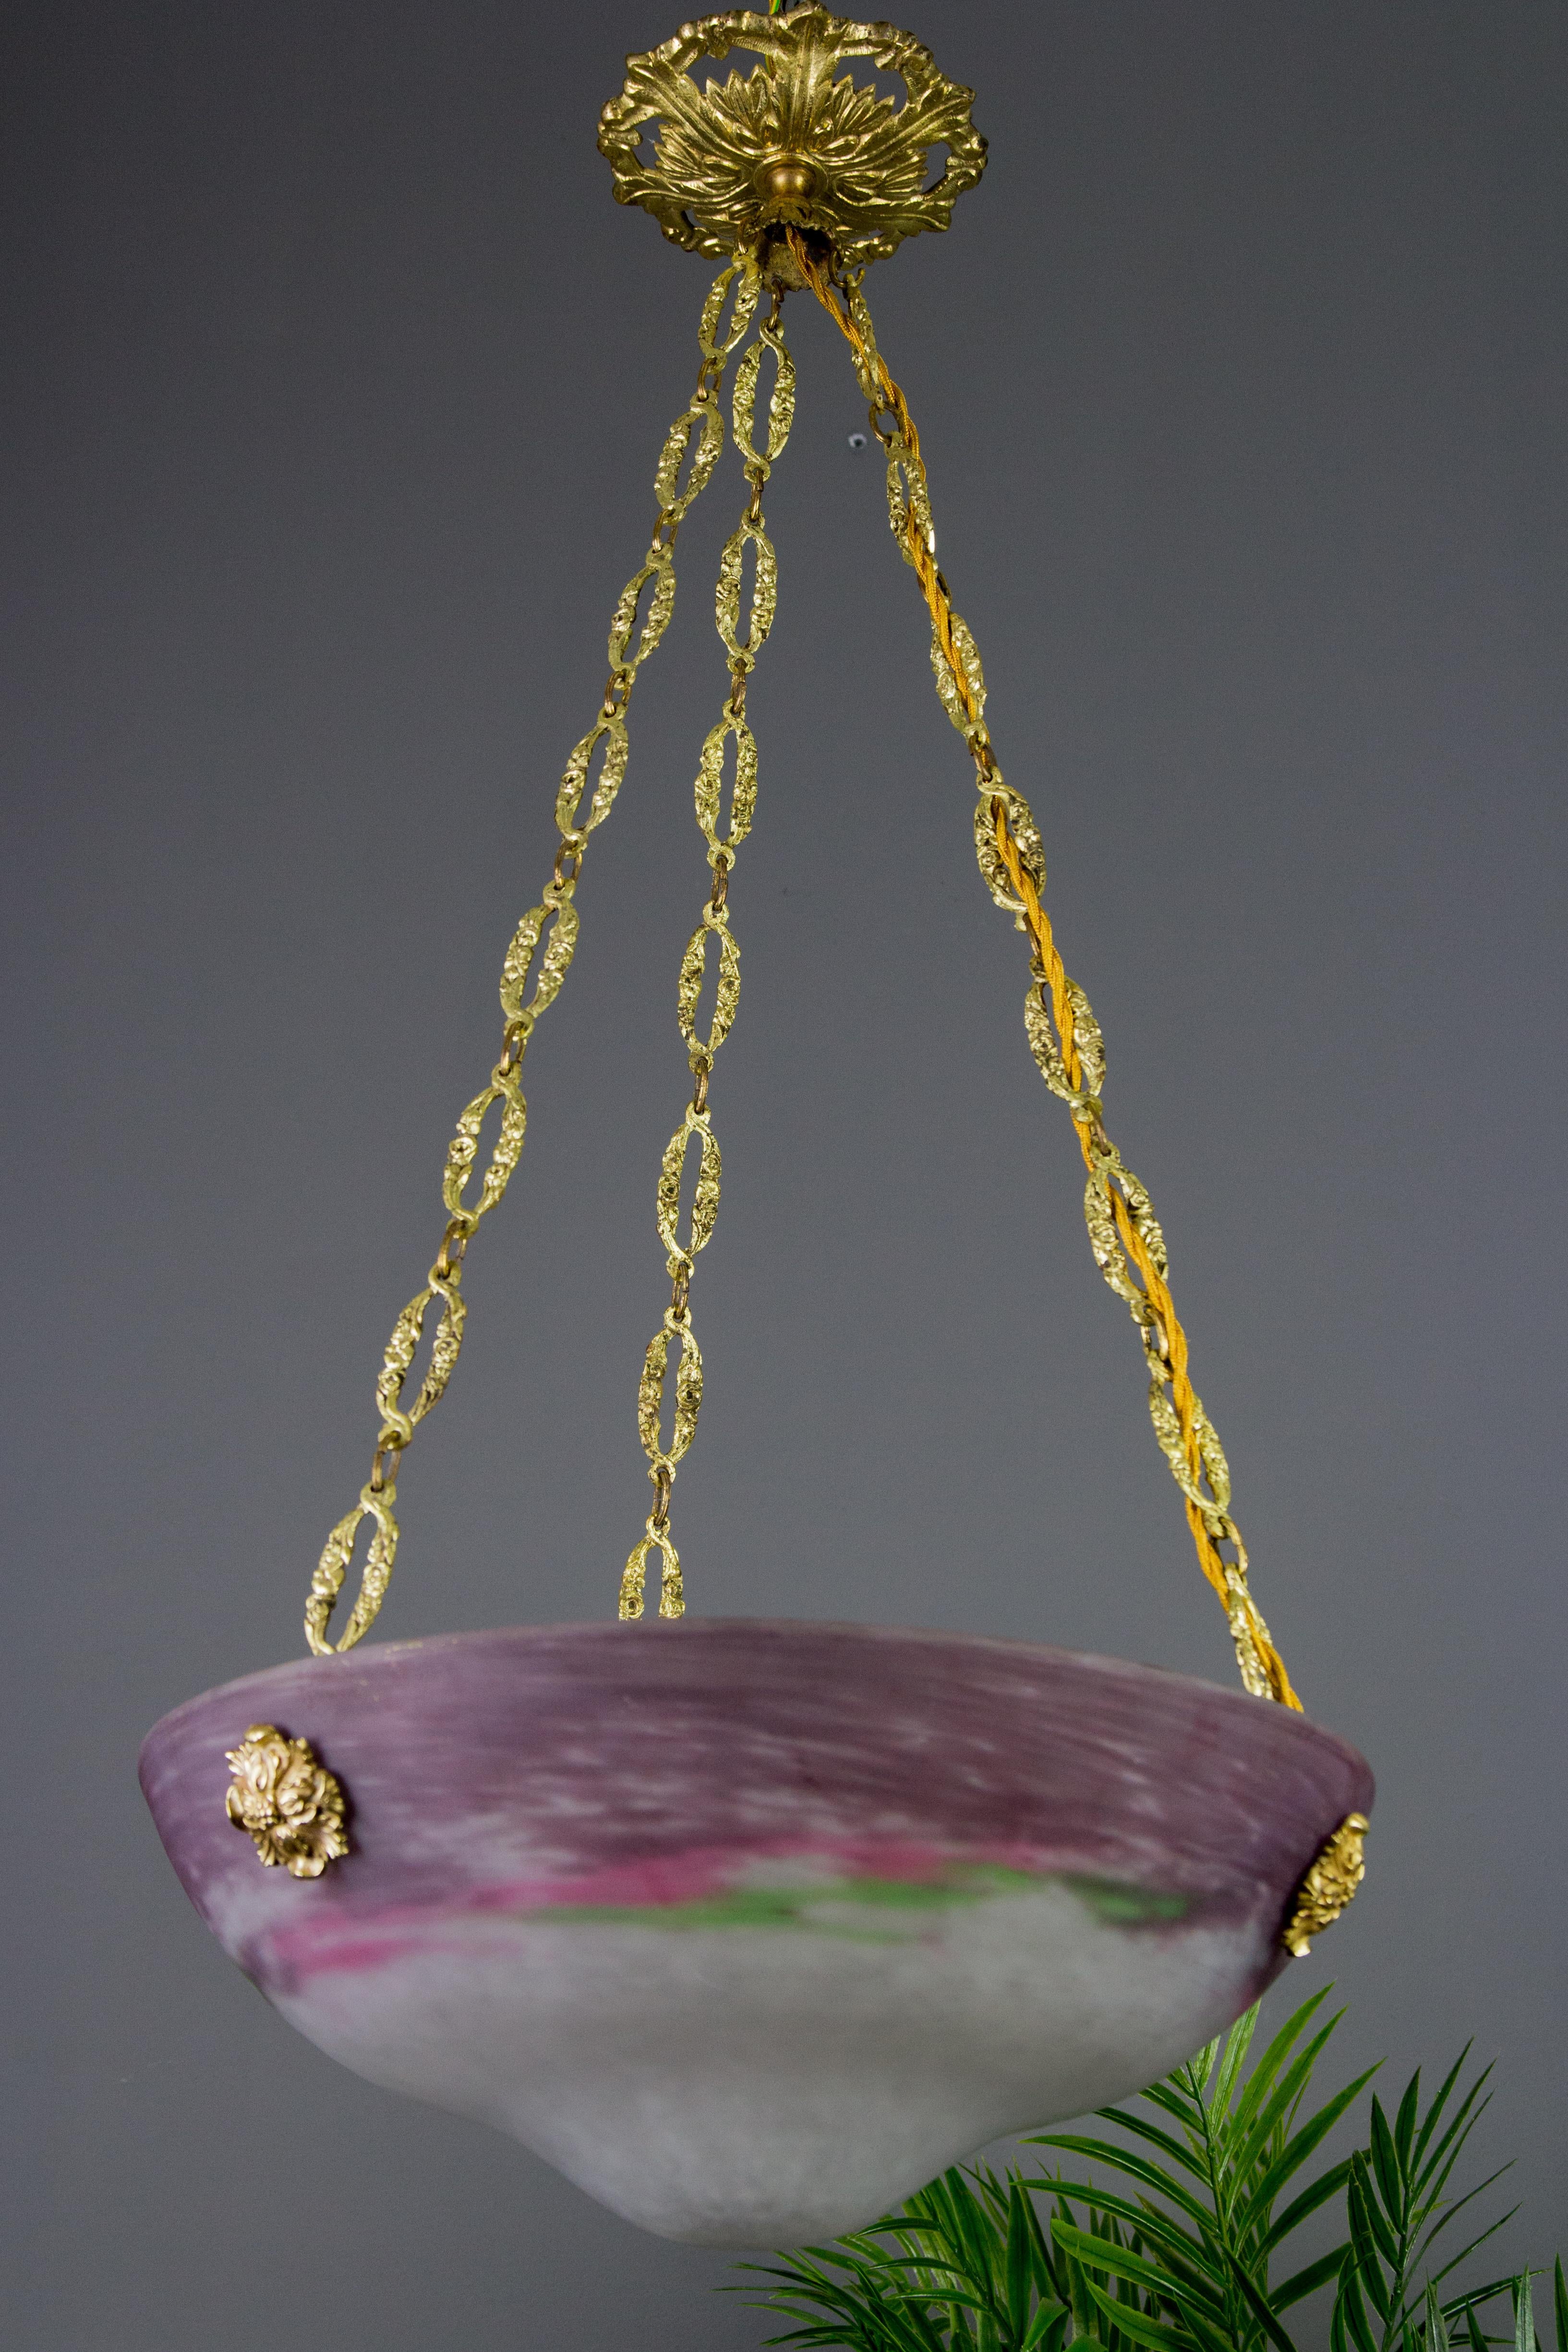 French Art Nouveau Glass Bowl Pendant Chandelier Signed by Muller Frères, 1920s For Sale 2